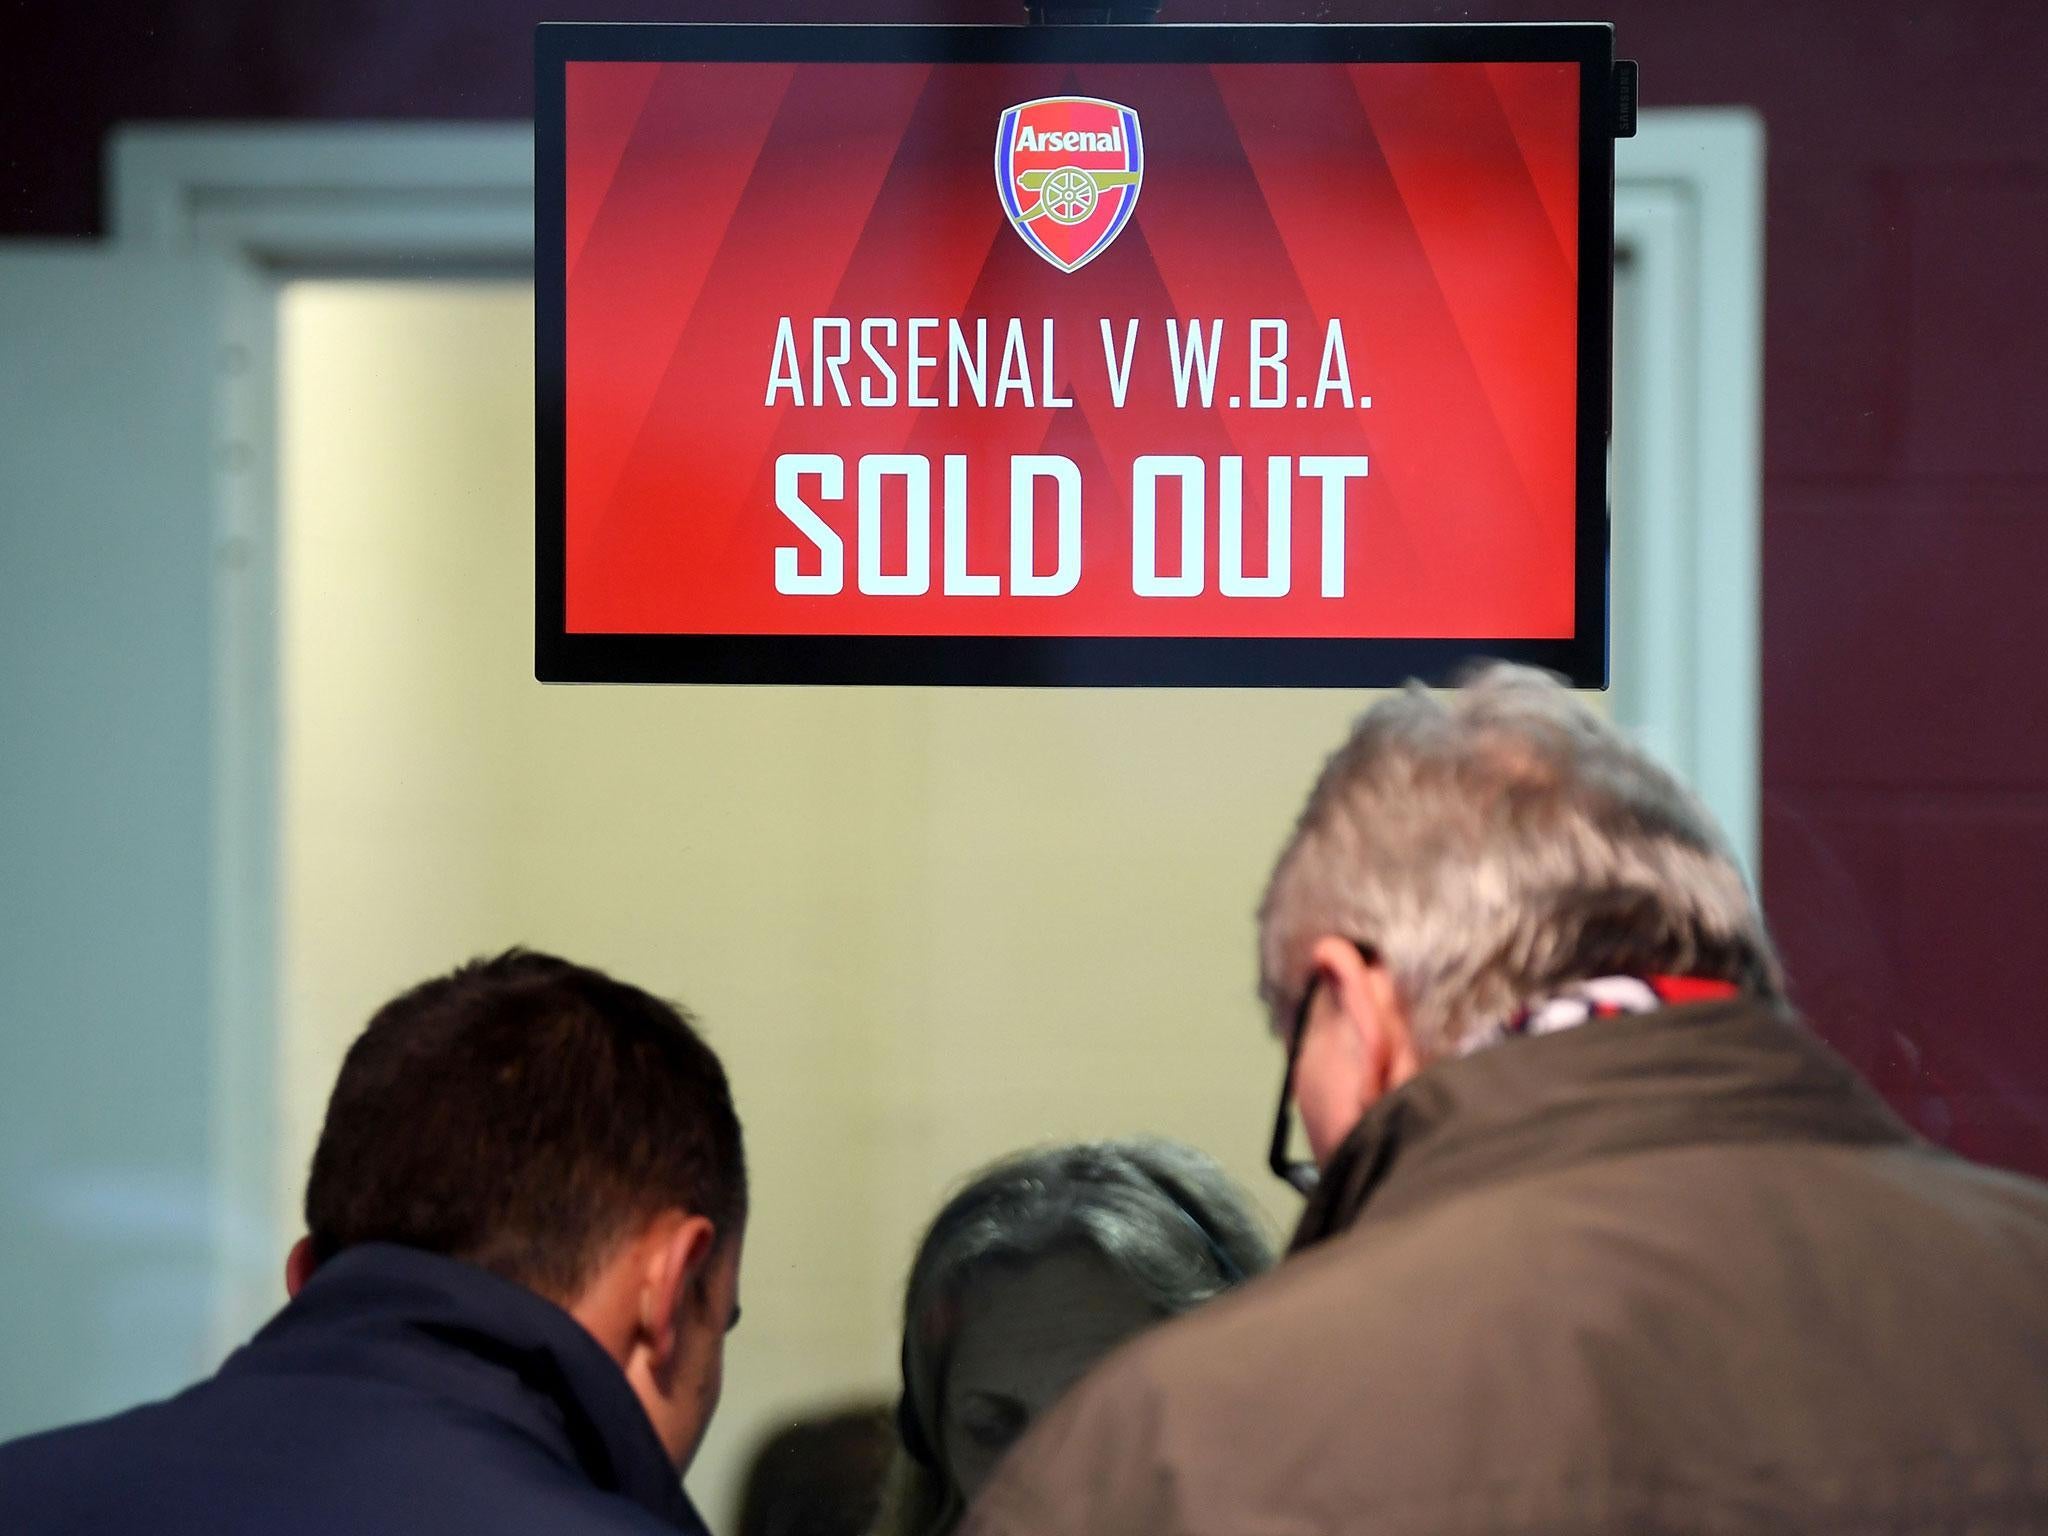 The average cost of tickets in the Premier League is £32 according to new research